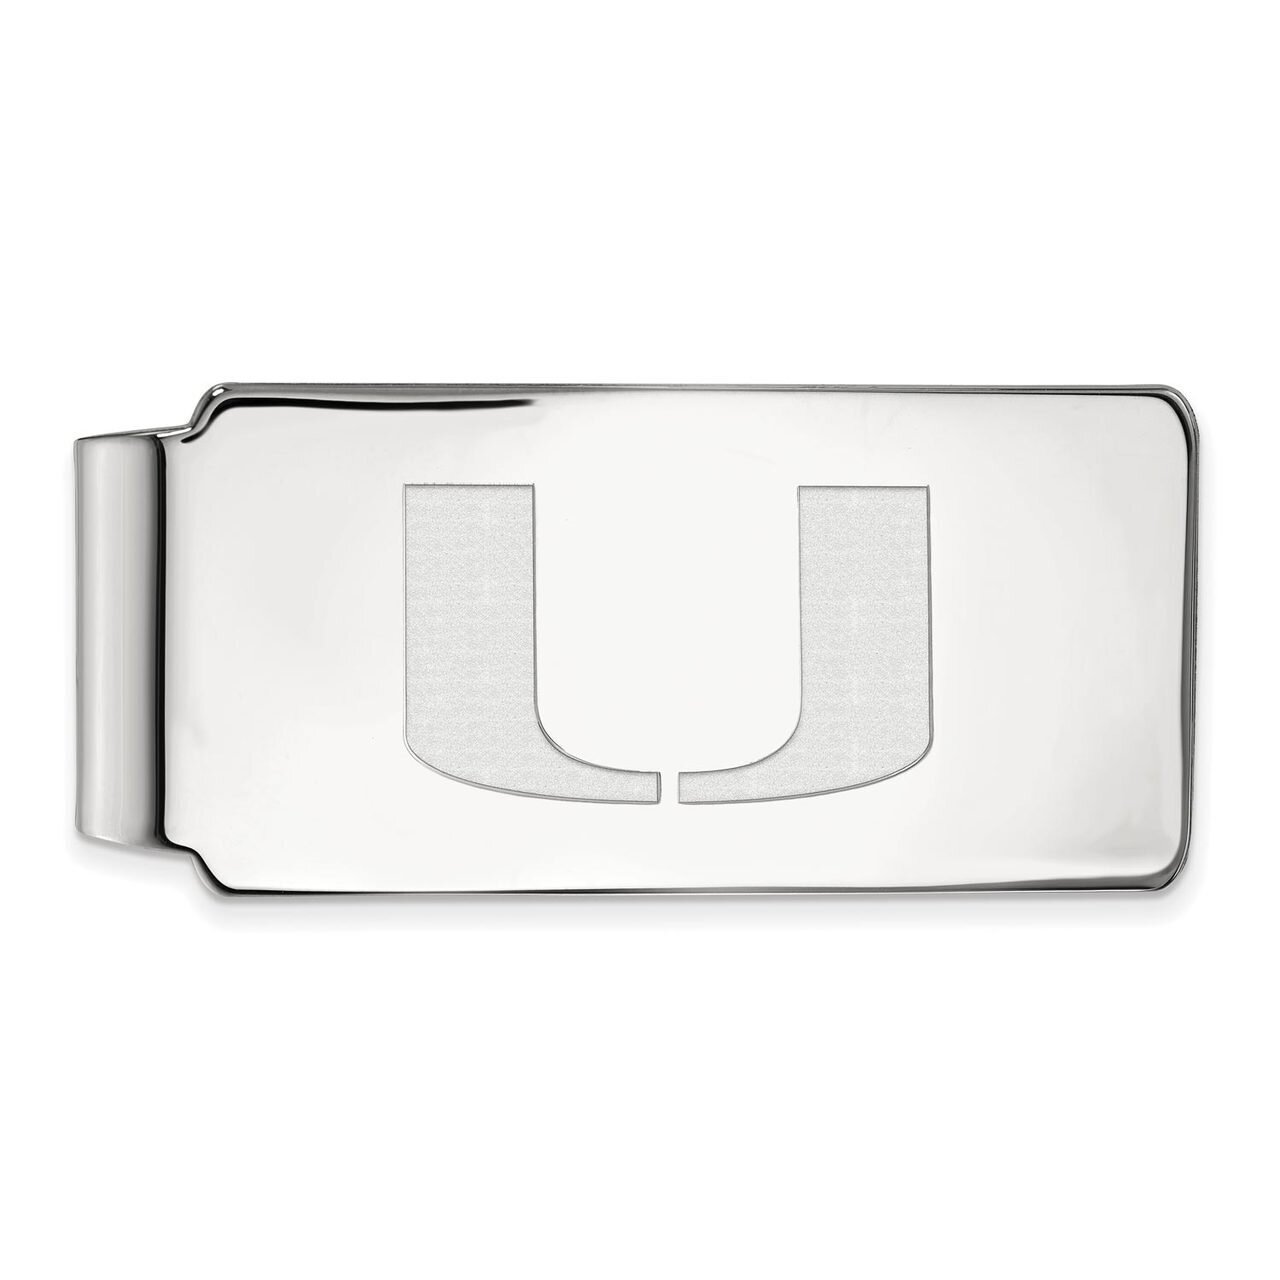 University of Miami Money Clip Sterling Silver SS025UMF